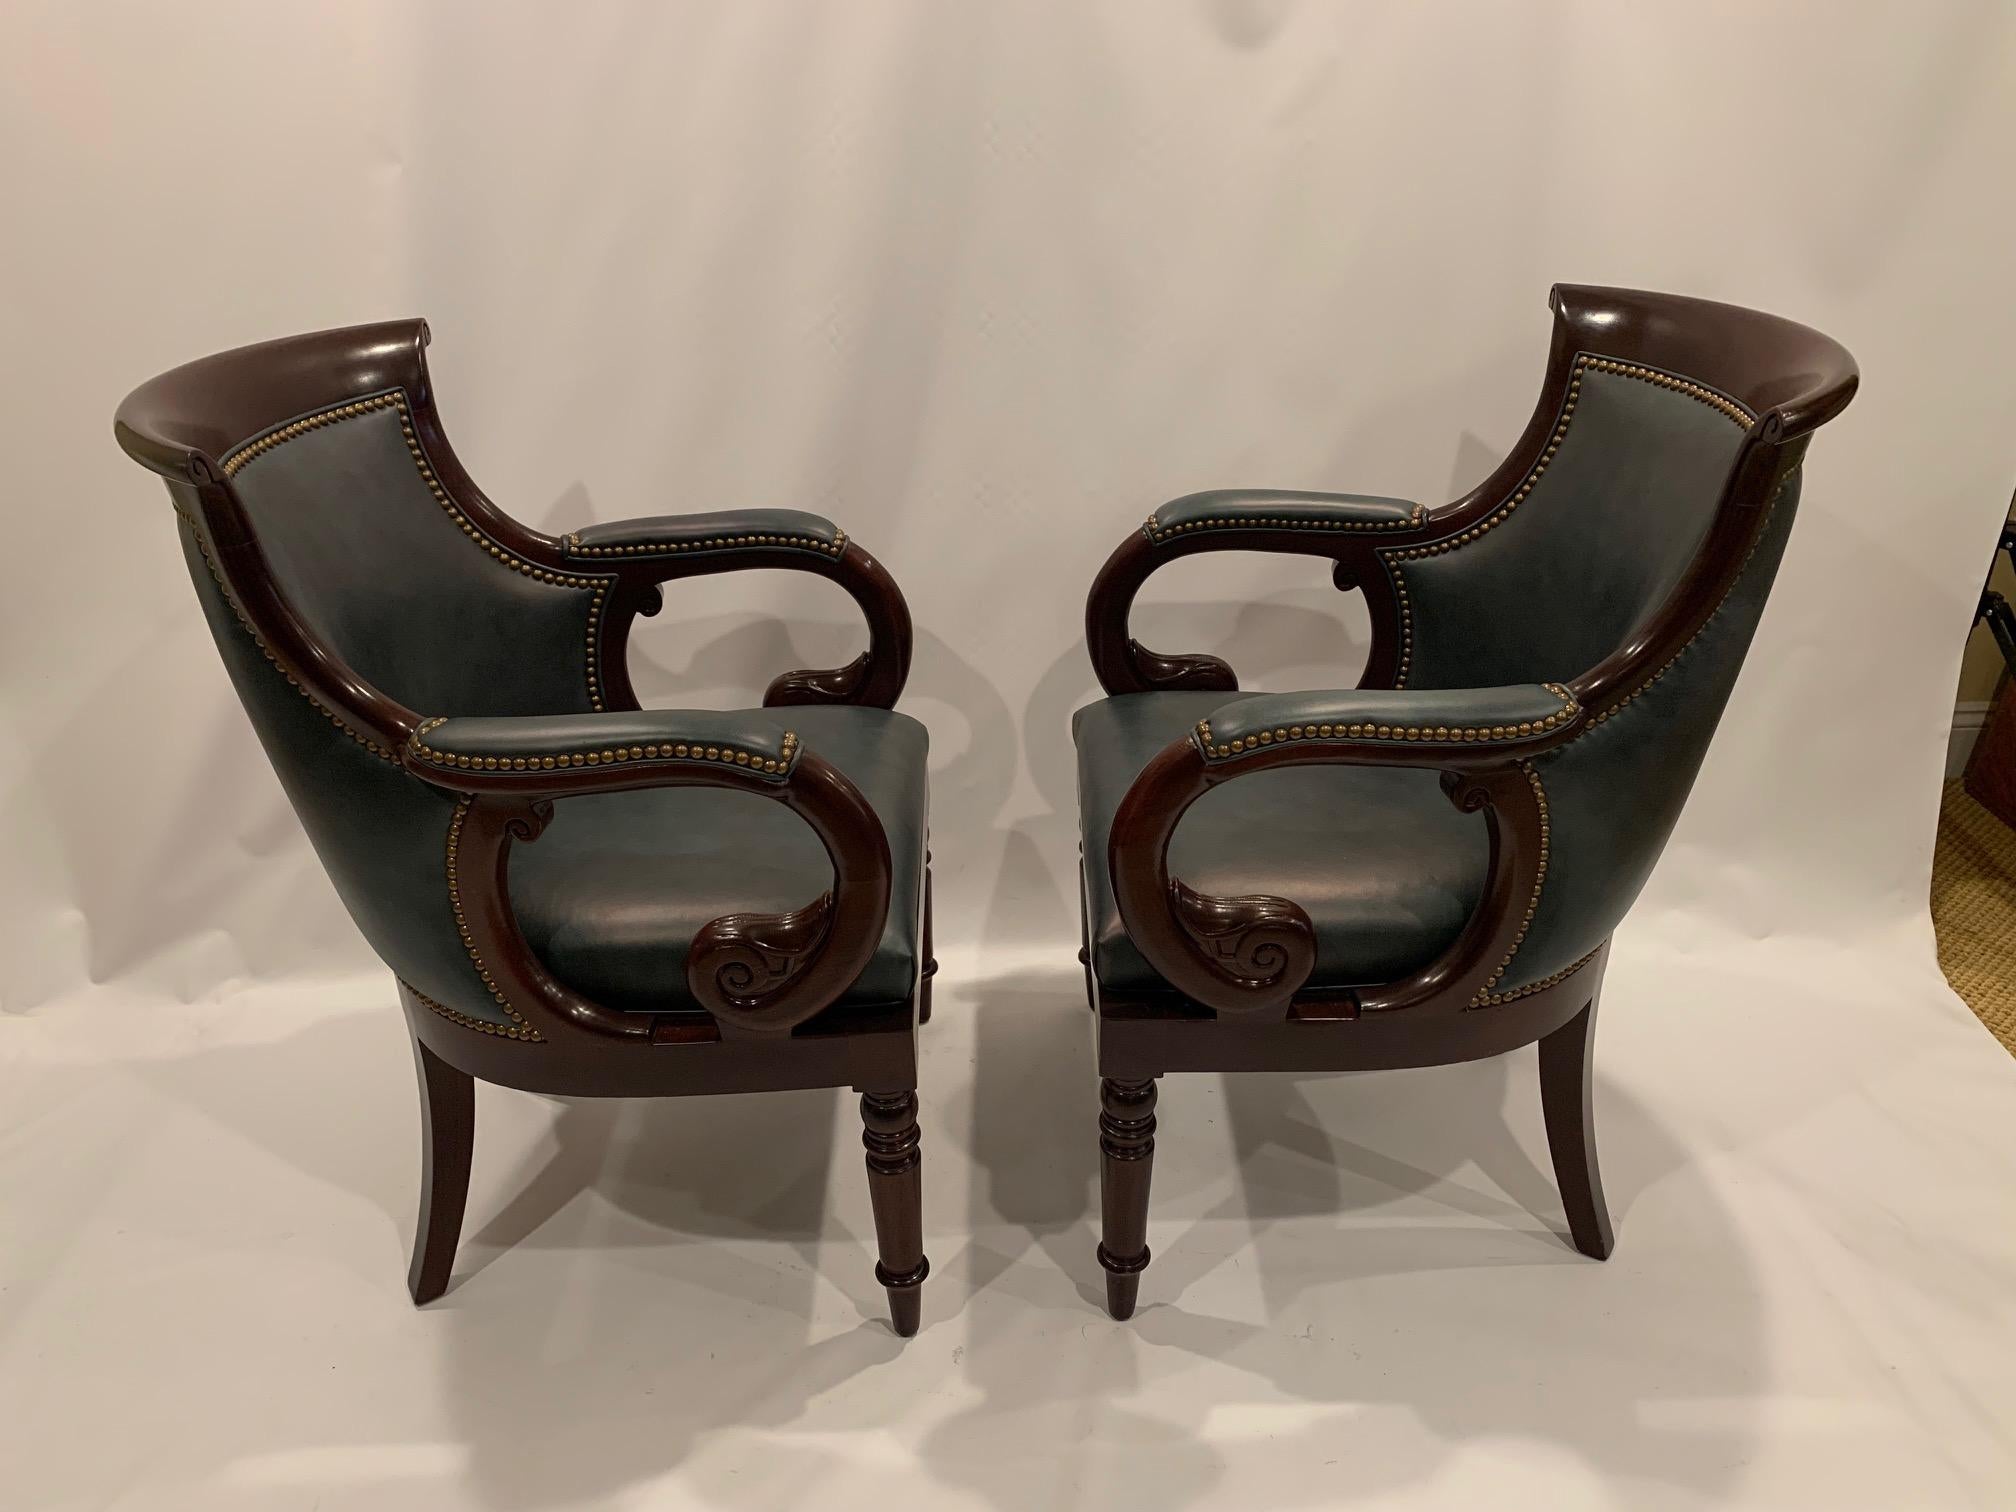 A richly elegant pair of barrel back shaped club chairs having mahogany frames, curved arms and turned legs. The warm brown of the wood is complimented by the sumptuous blue leather. Brass nailheads add an exquisite icing to the cake. Chairs are